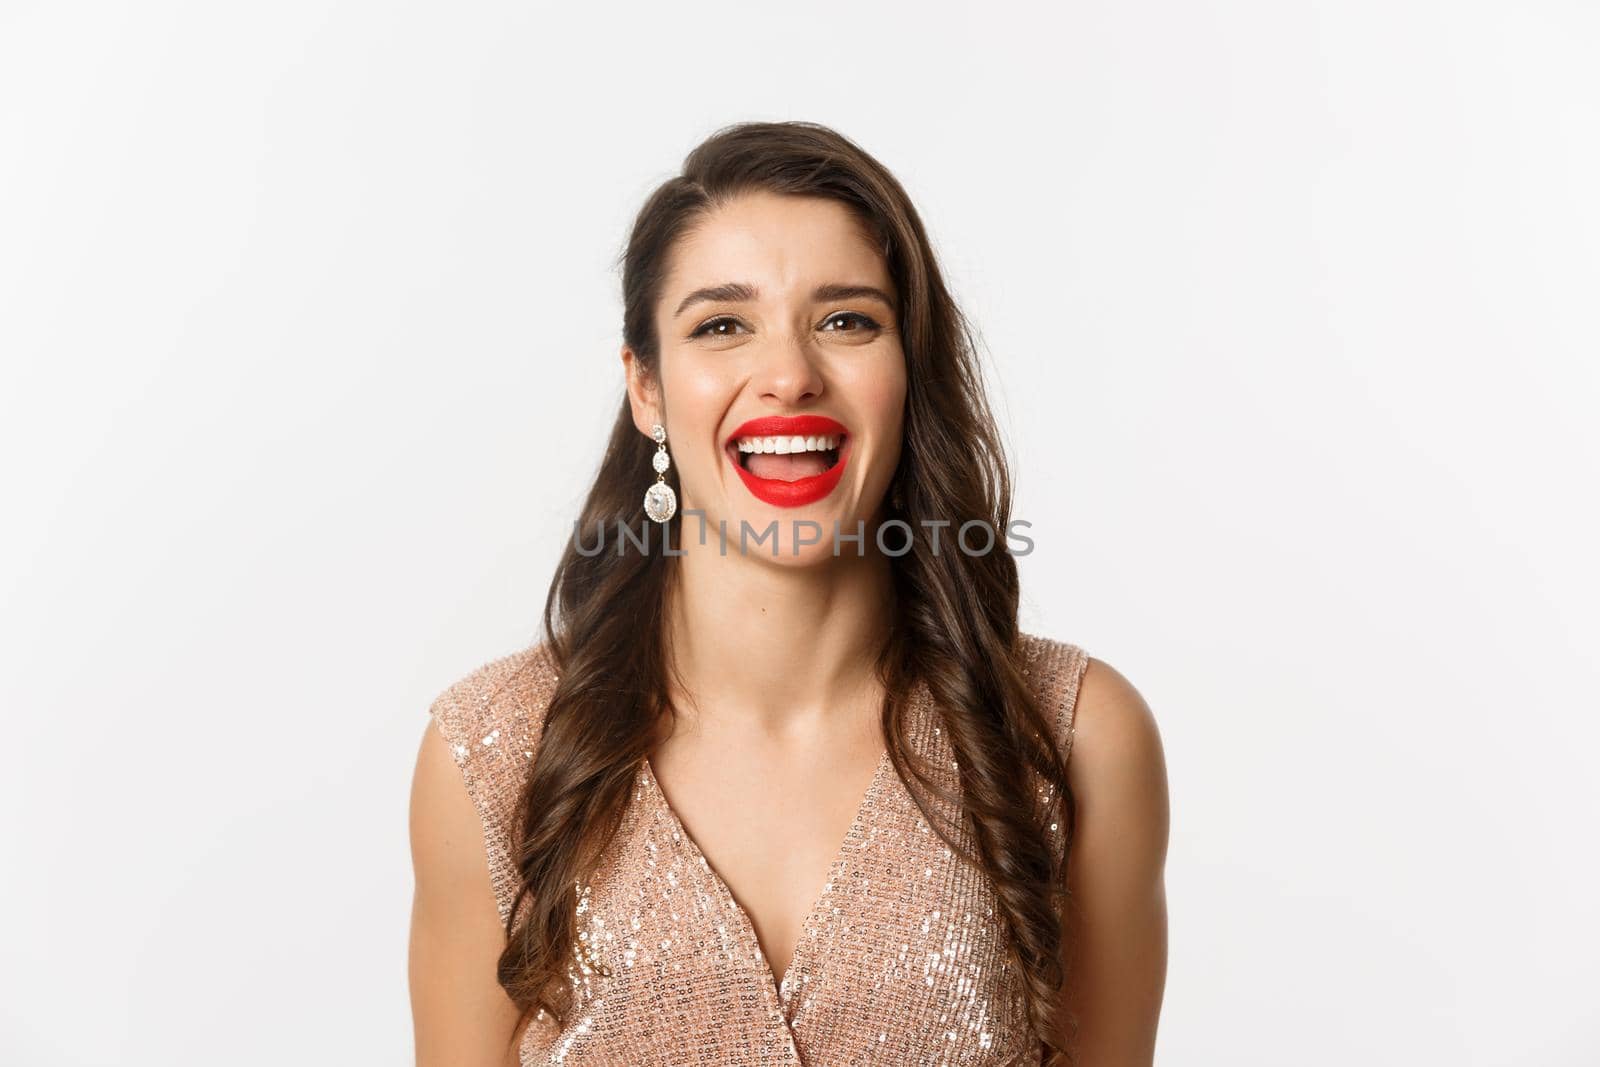 Concept of New Year celebration and winter holidays. Close-up of happy young woman dressed for party, laughing and smiling at camera, white background.